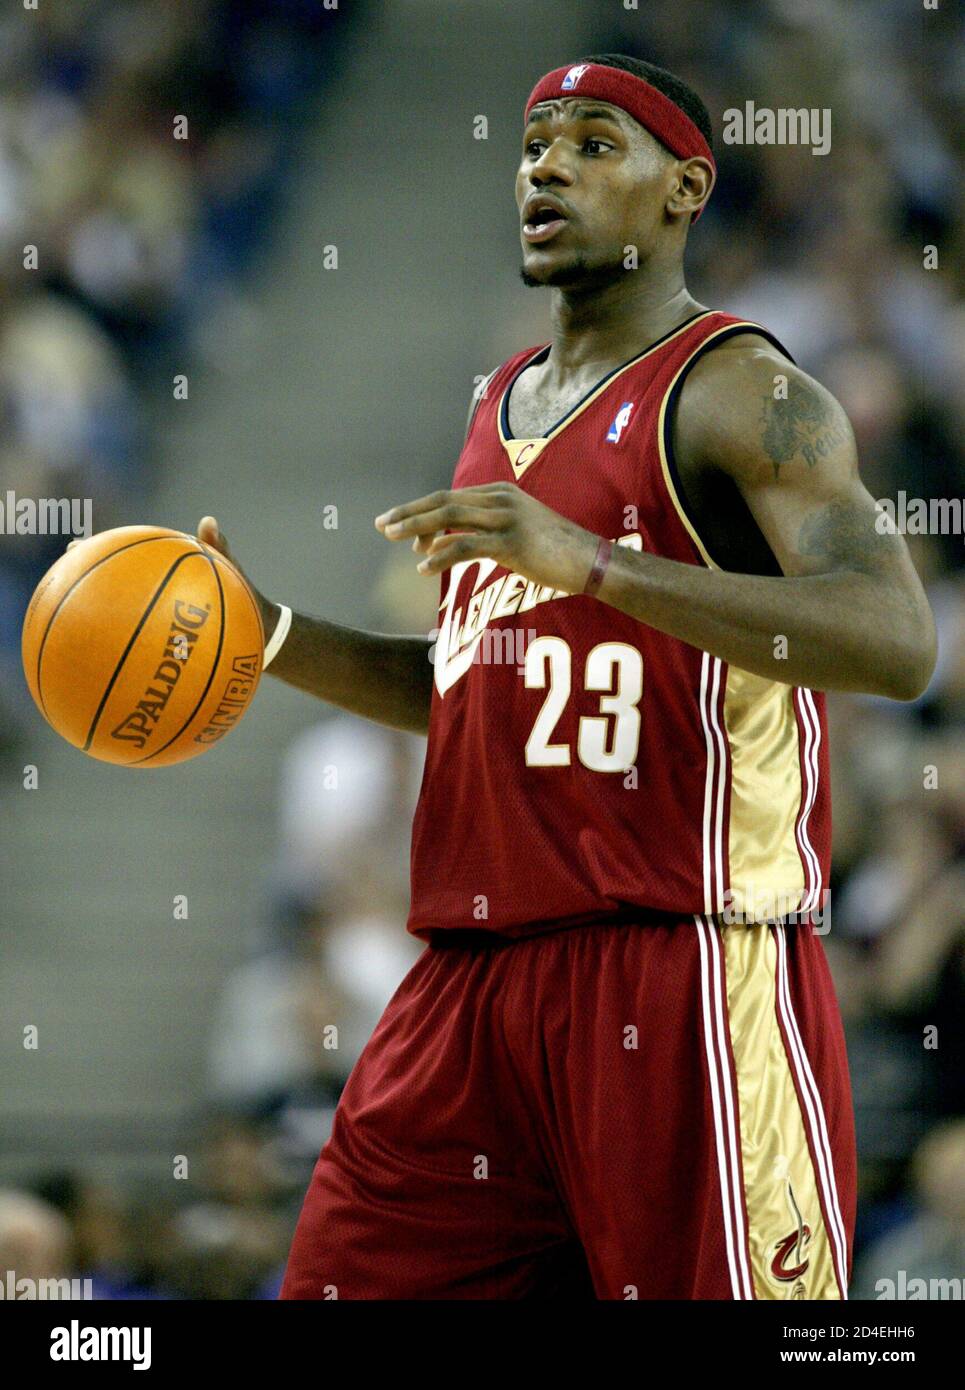 Cleveland Cavaliers' LeBron James (23) makes his NBA debut against he  Sacramento Kings in Sacramento, California October 29, 2003. The  18-year-old 6-foot-8 James, first pick in the 2003 NBA draft, made his